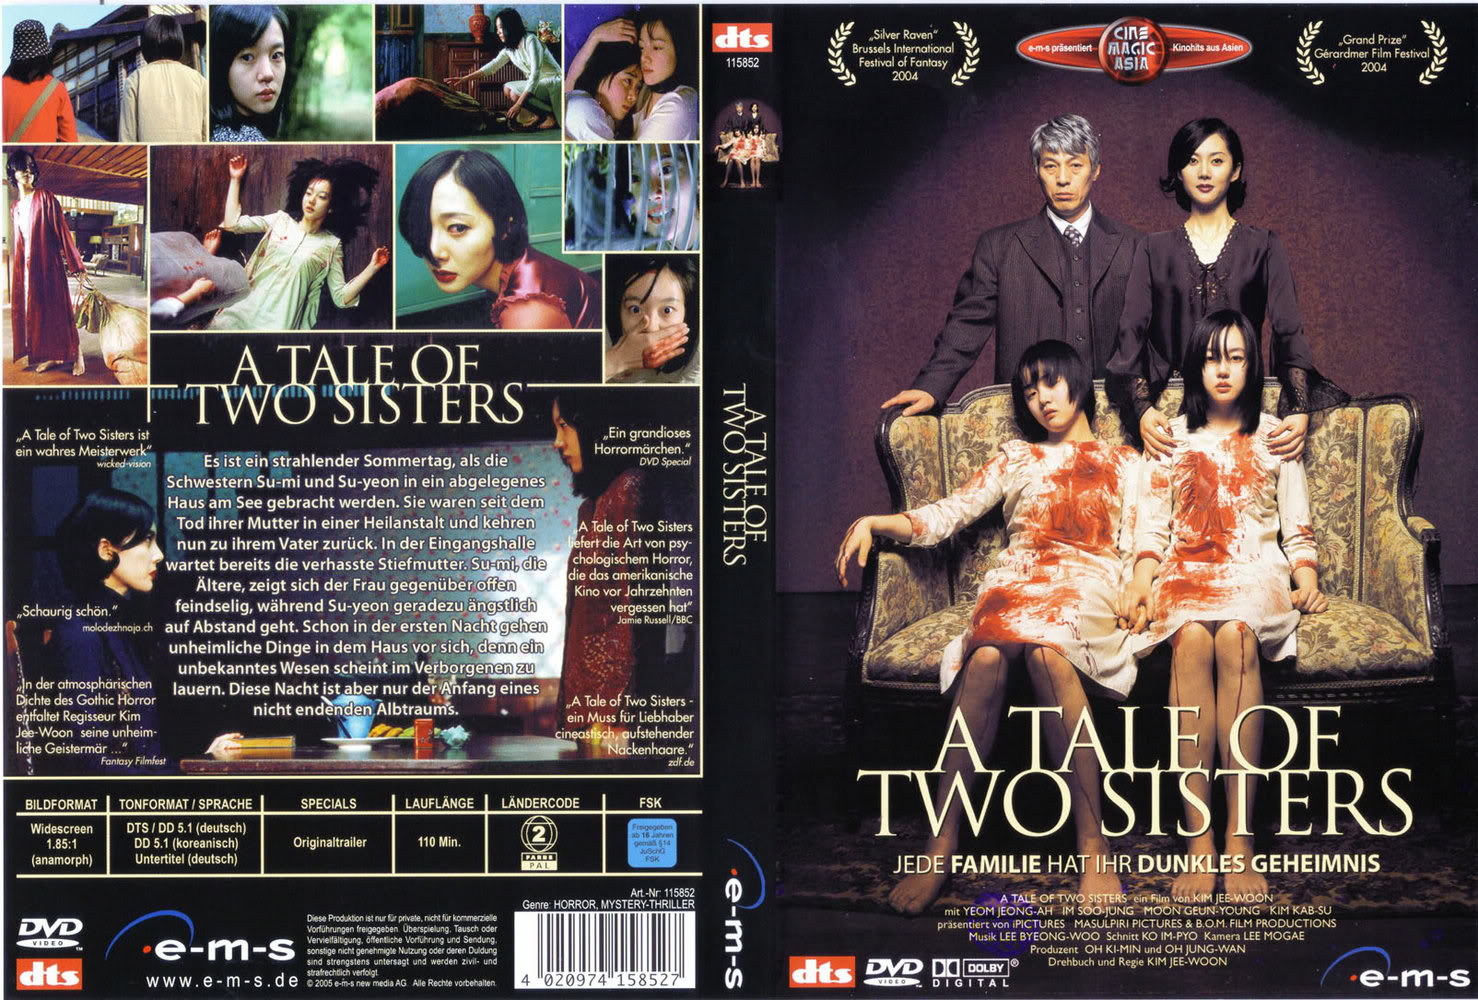 Tale of two sisters Постер. "A Tale of two sisters" (South Korea, 2003). Chantelise – a Tale of two sisters. Twin Quest -the Tale of two sisters-. A tale of two песня